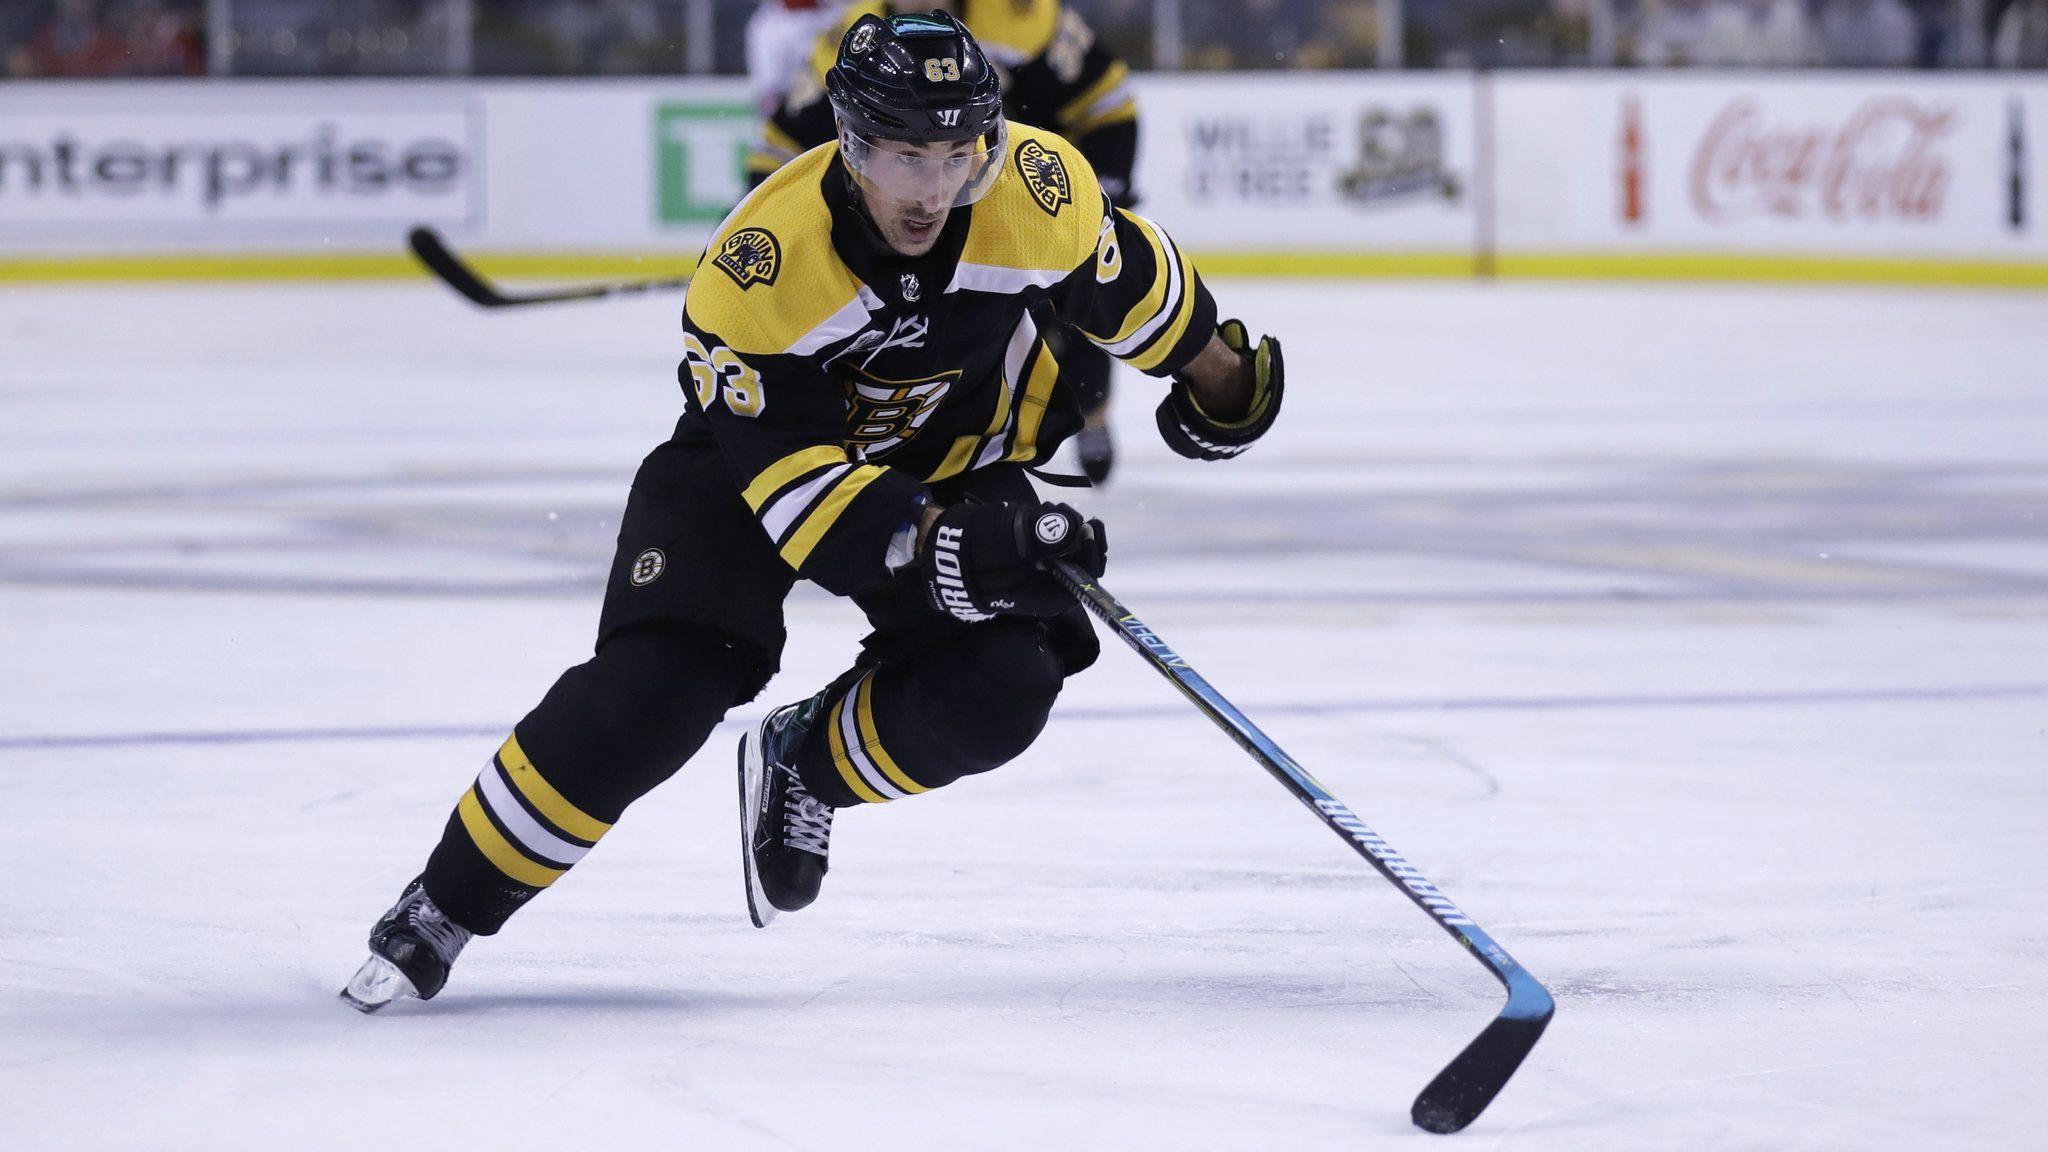 Brad Marchand Addresses 5 Game Suspension: 'I Let My Teammates Down